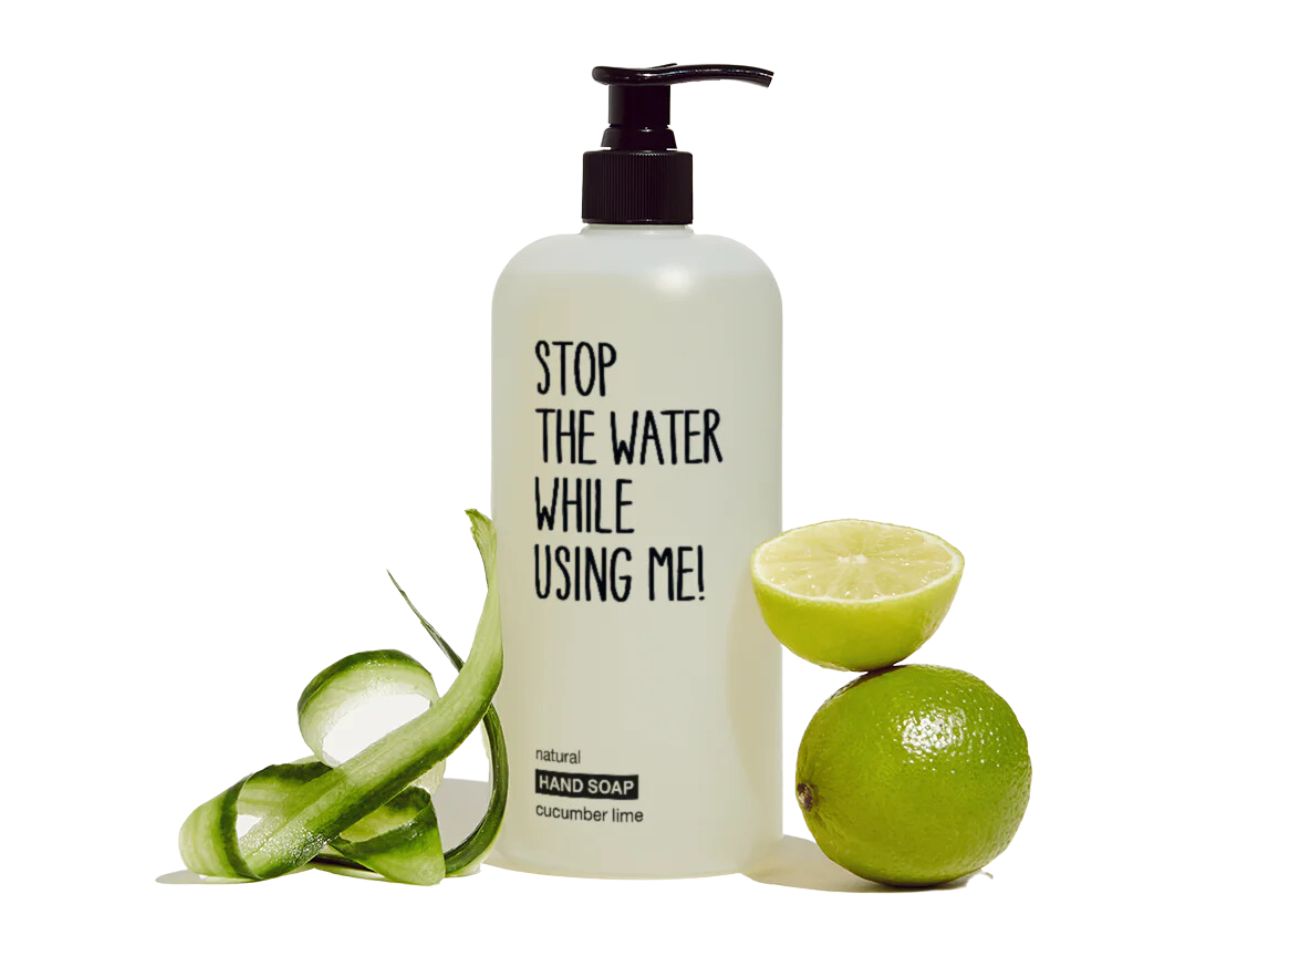 STOP THE WATER WHILE USING ME I HAND SOAP I CUCUMBER LIME HAND SOAP I 500ml 